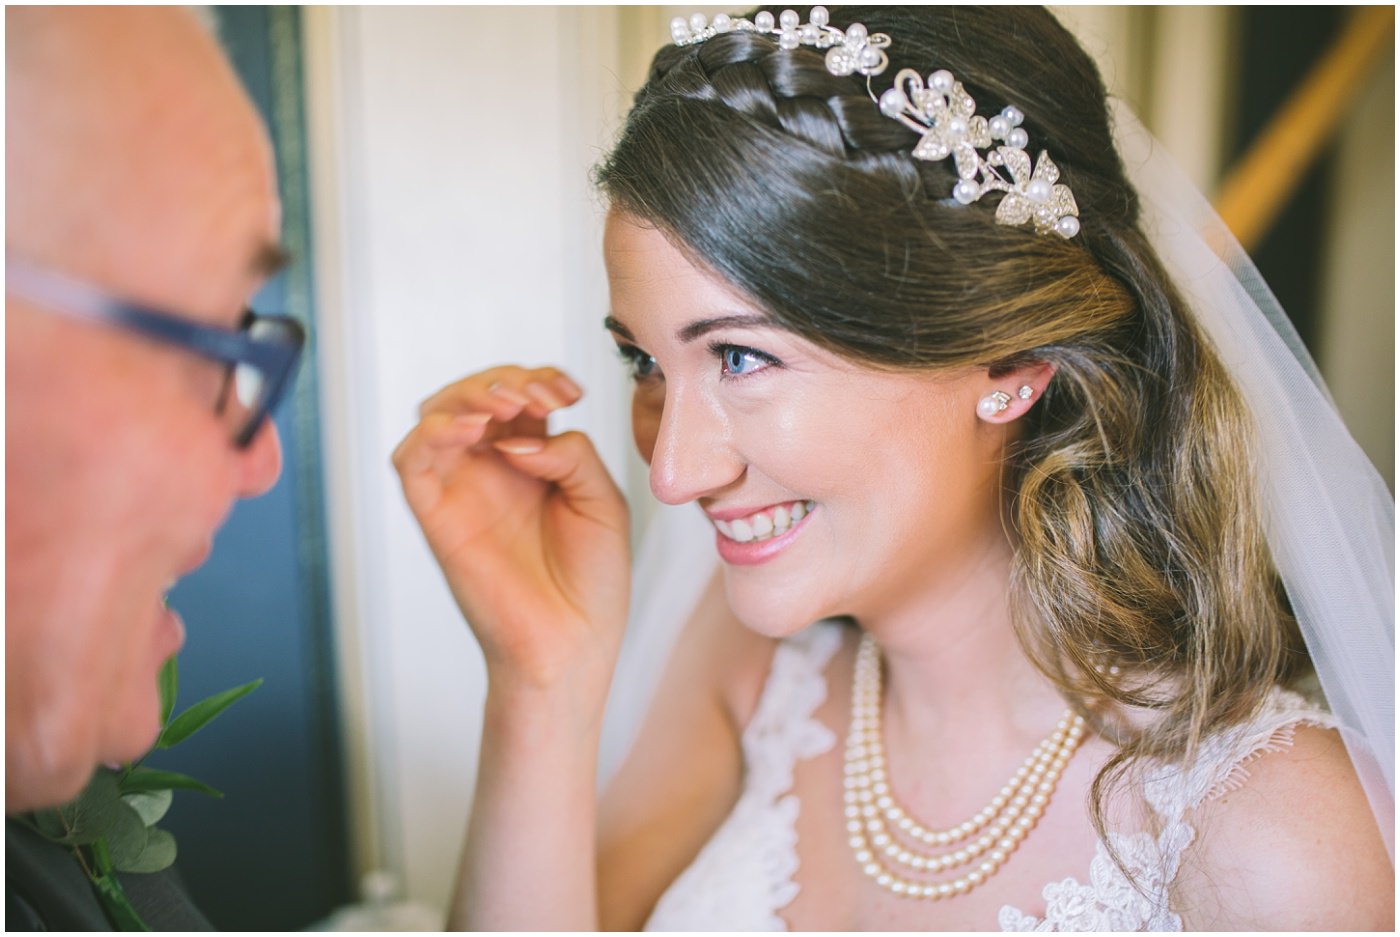 Tears from the bride as her dad sees her in her dress for the first time